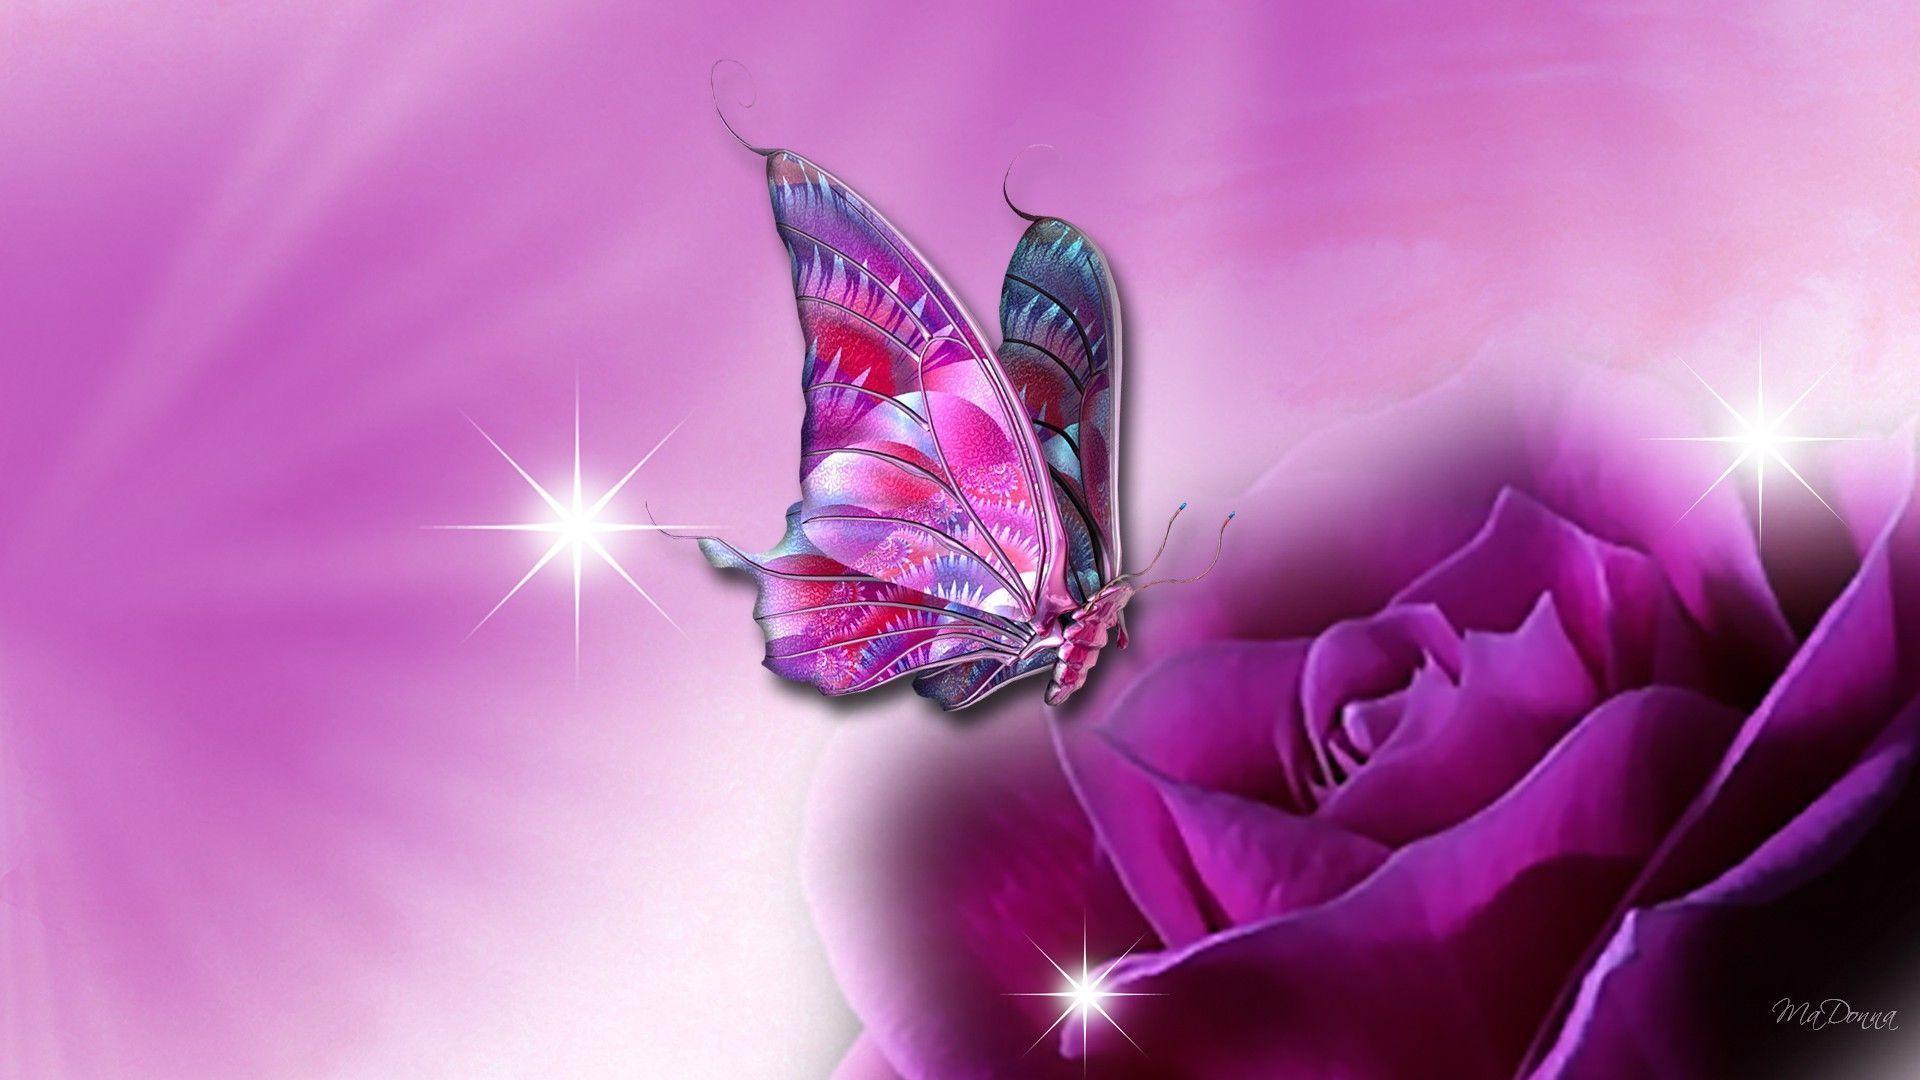 Download Awesome Butterfly For Laptop Wallpaper. Full HD Background